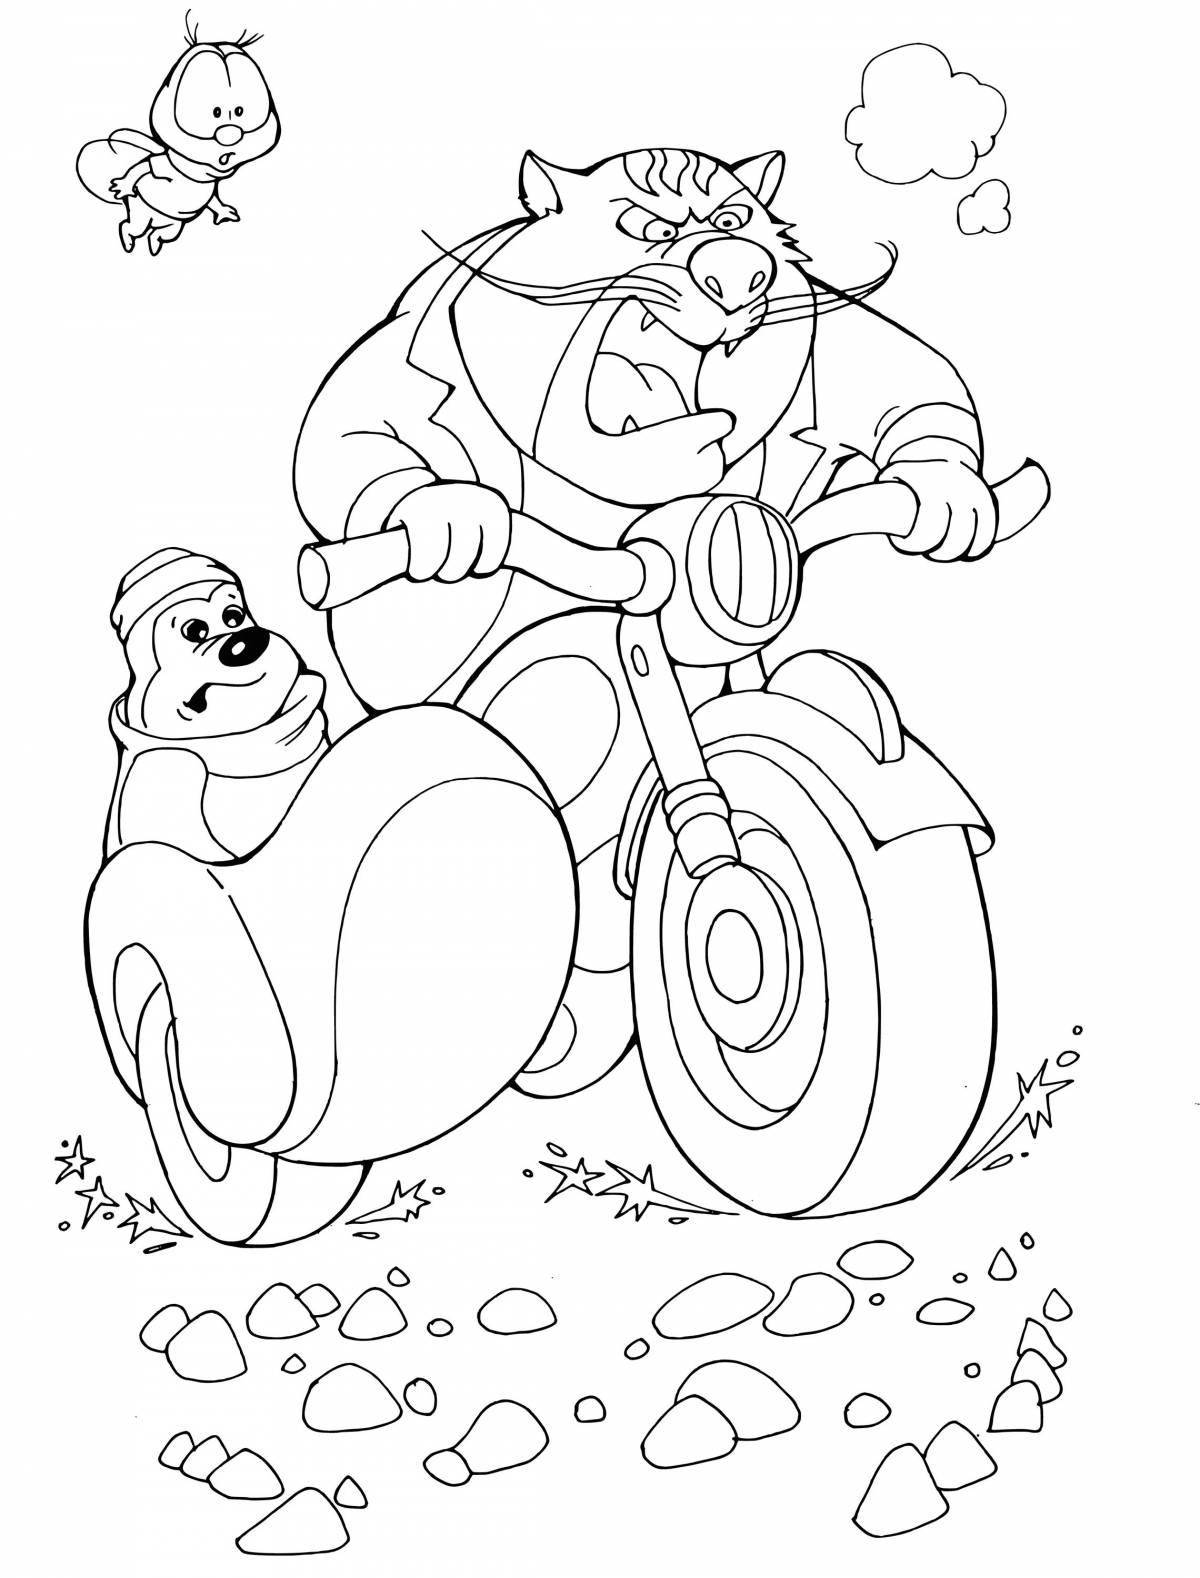 Awesome dale coloring page